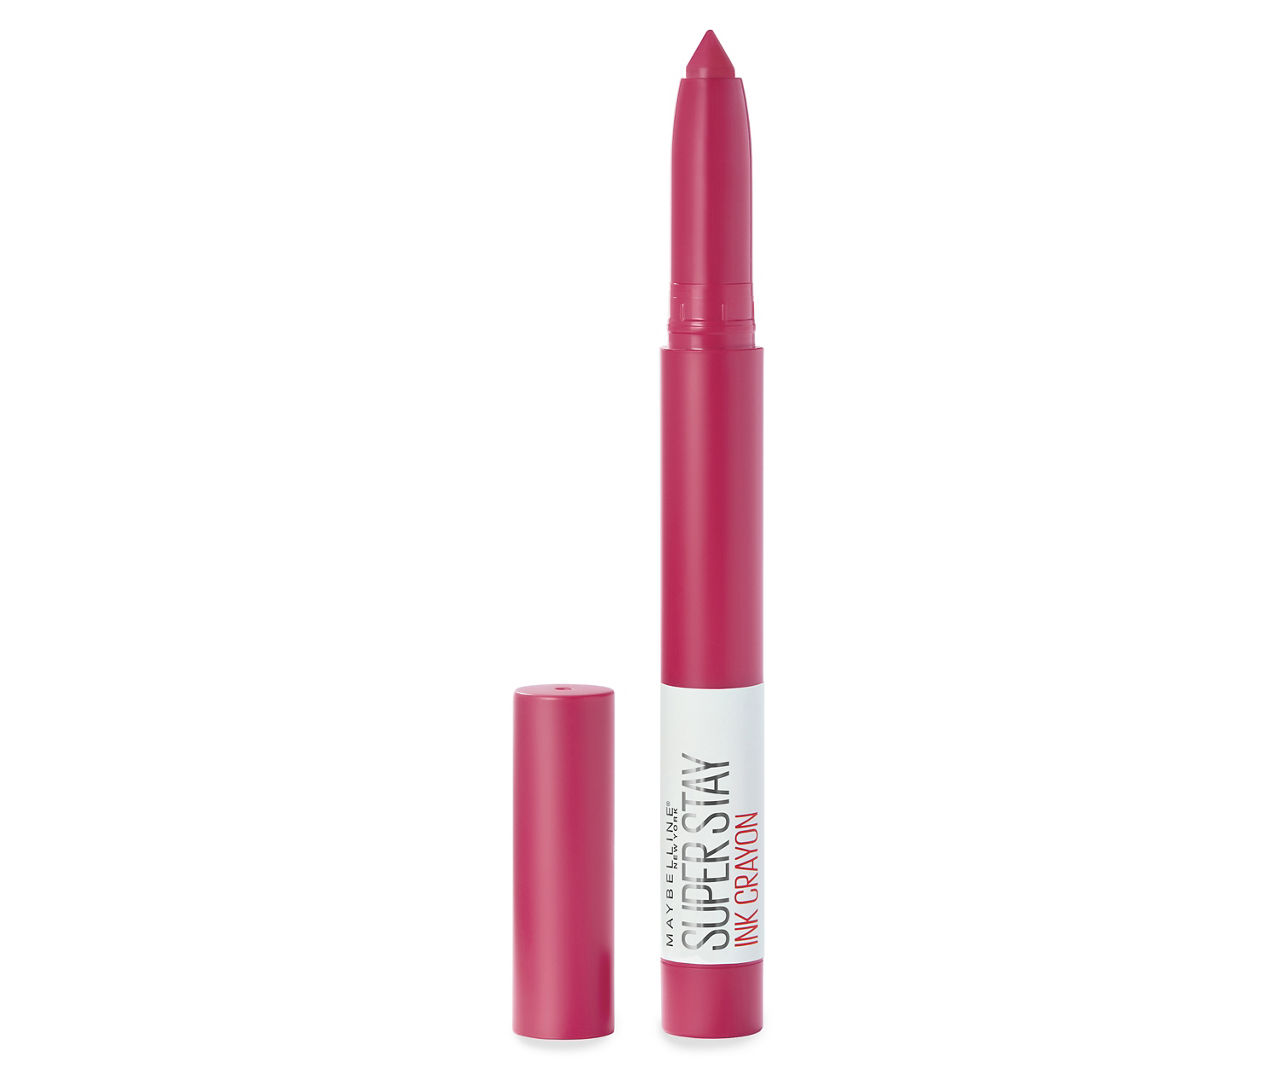 Superstay Ink Crayon Lipstick in Treat Yourself